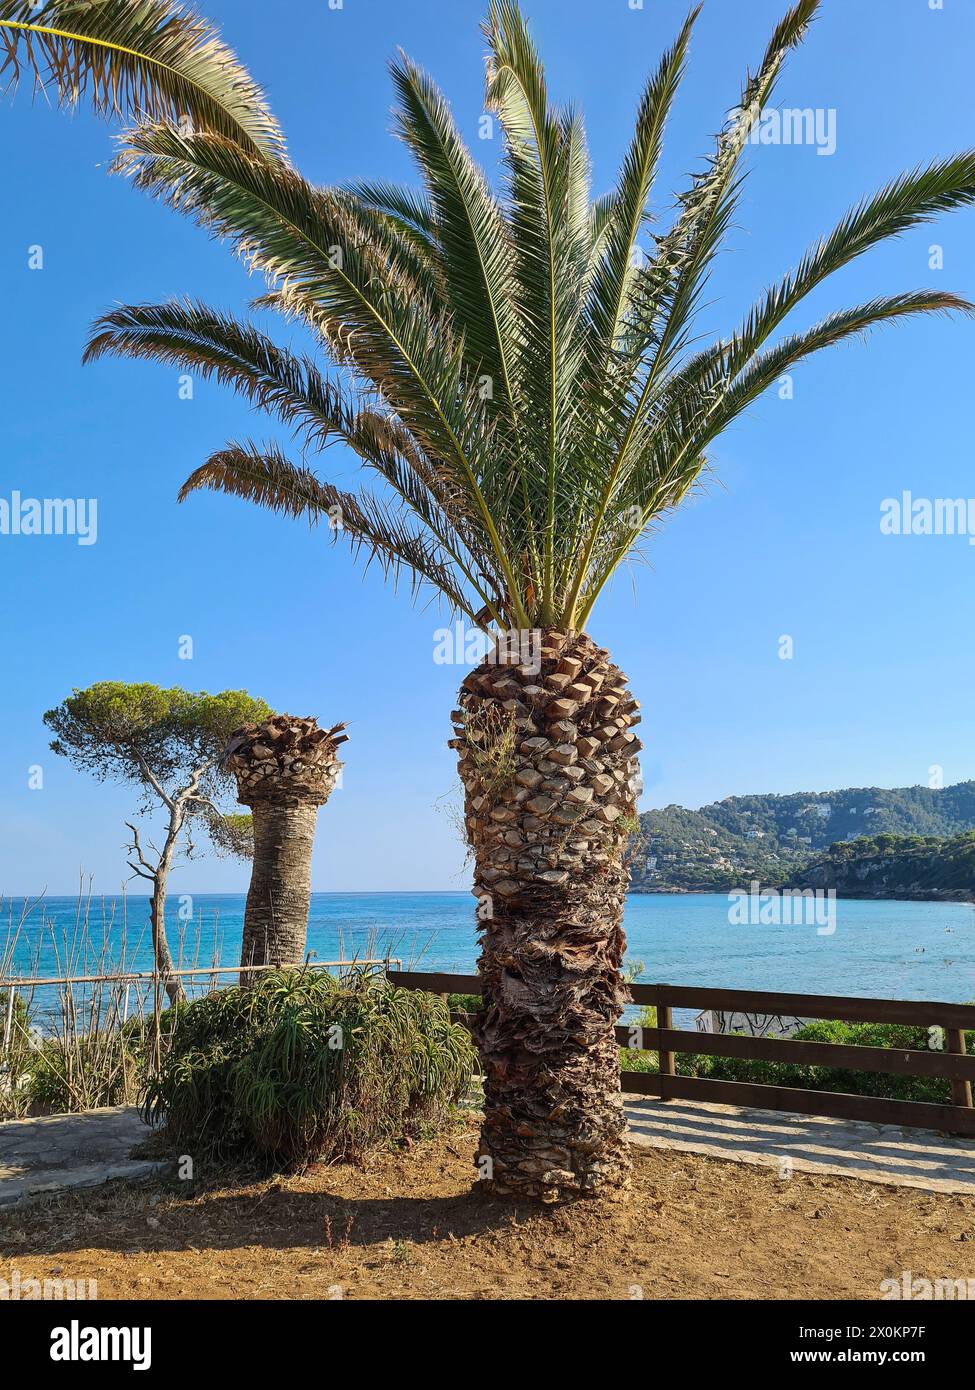 In the foreground is a large palm tree, in the background you can see the bay of Canyamel and the sea against a blue sky, destination Mallorca, Spain Stock Photo